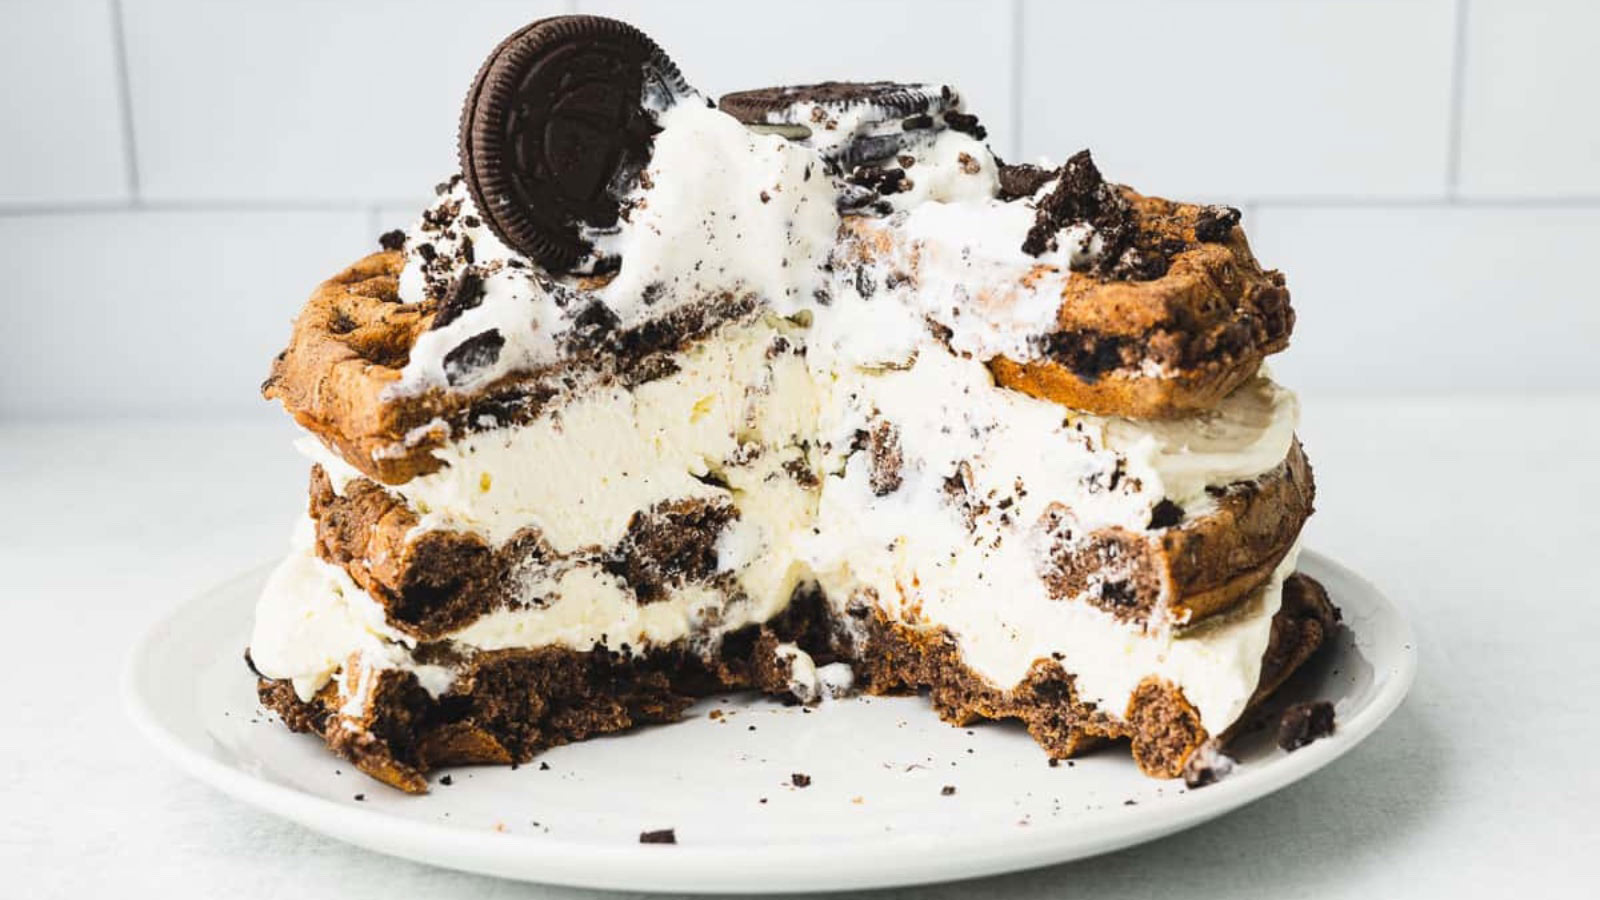 A stack of Oreo waffled with shipped cream between them.